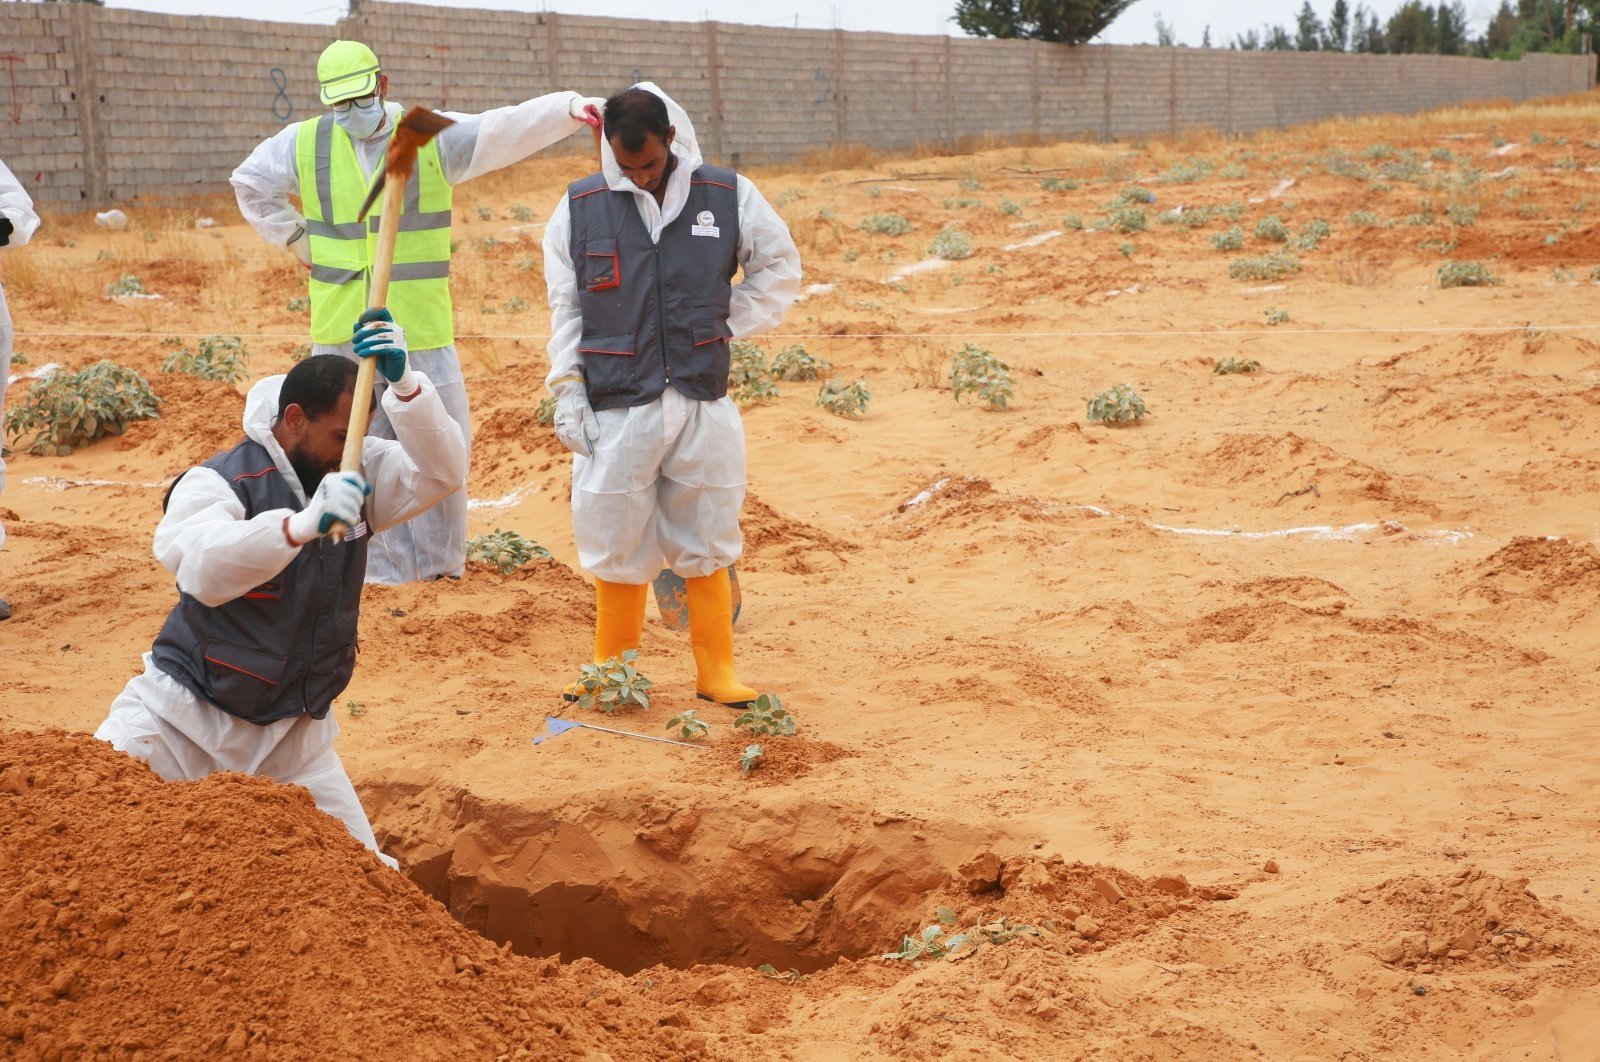 Libyan Ministry of Justice employees dig out at a site of a suspected mass grave in the town of Tarhouna, Libya, Tuesday, June 23, 2020. (AP Photo)